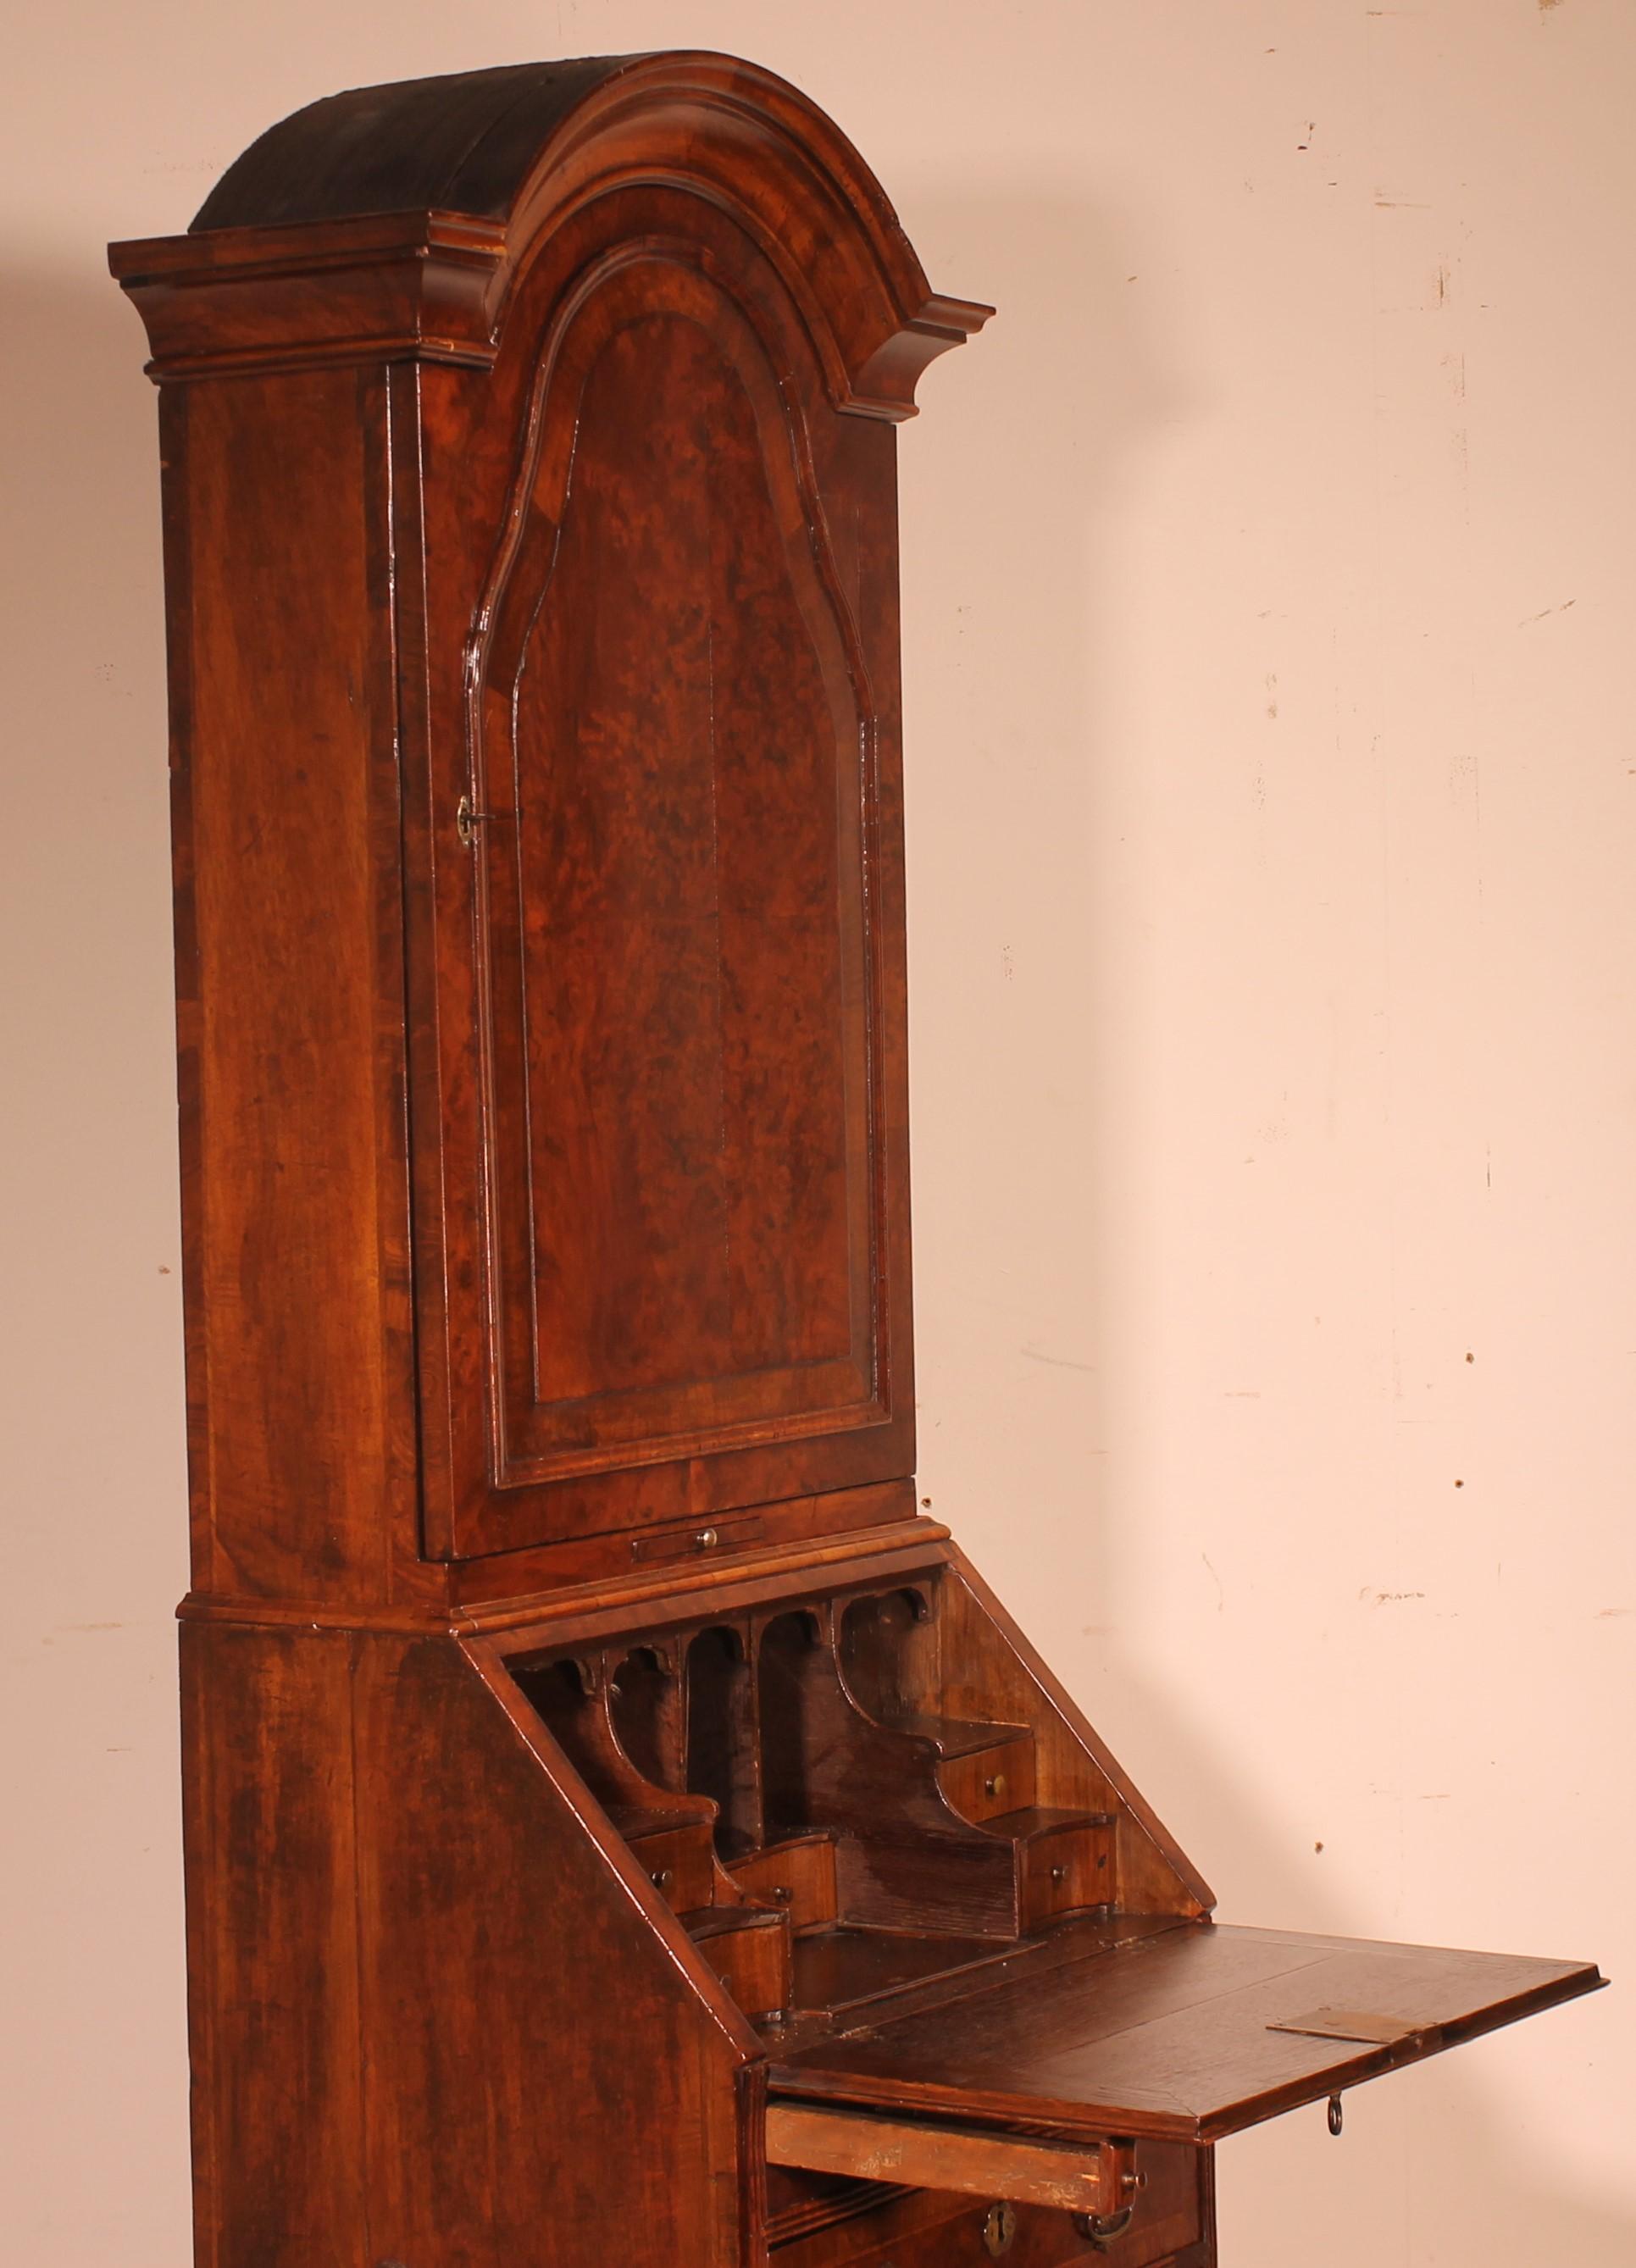 Small Secretary or Cabinet in Burl Walnut with Dome, 18 ° Century For Sale 6